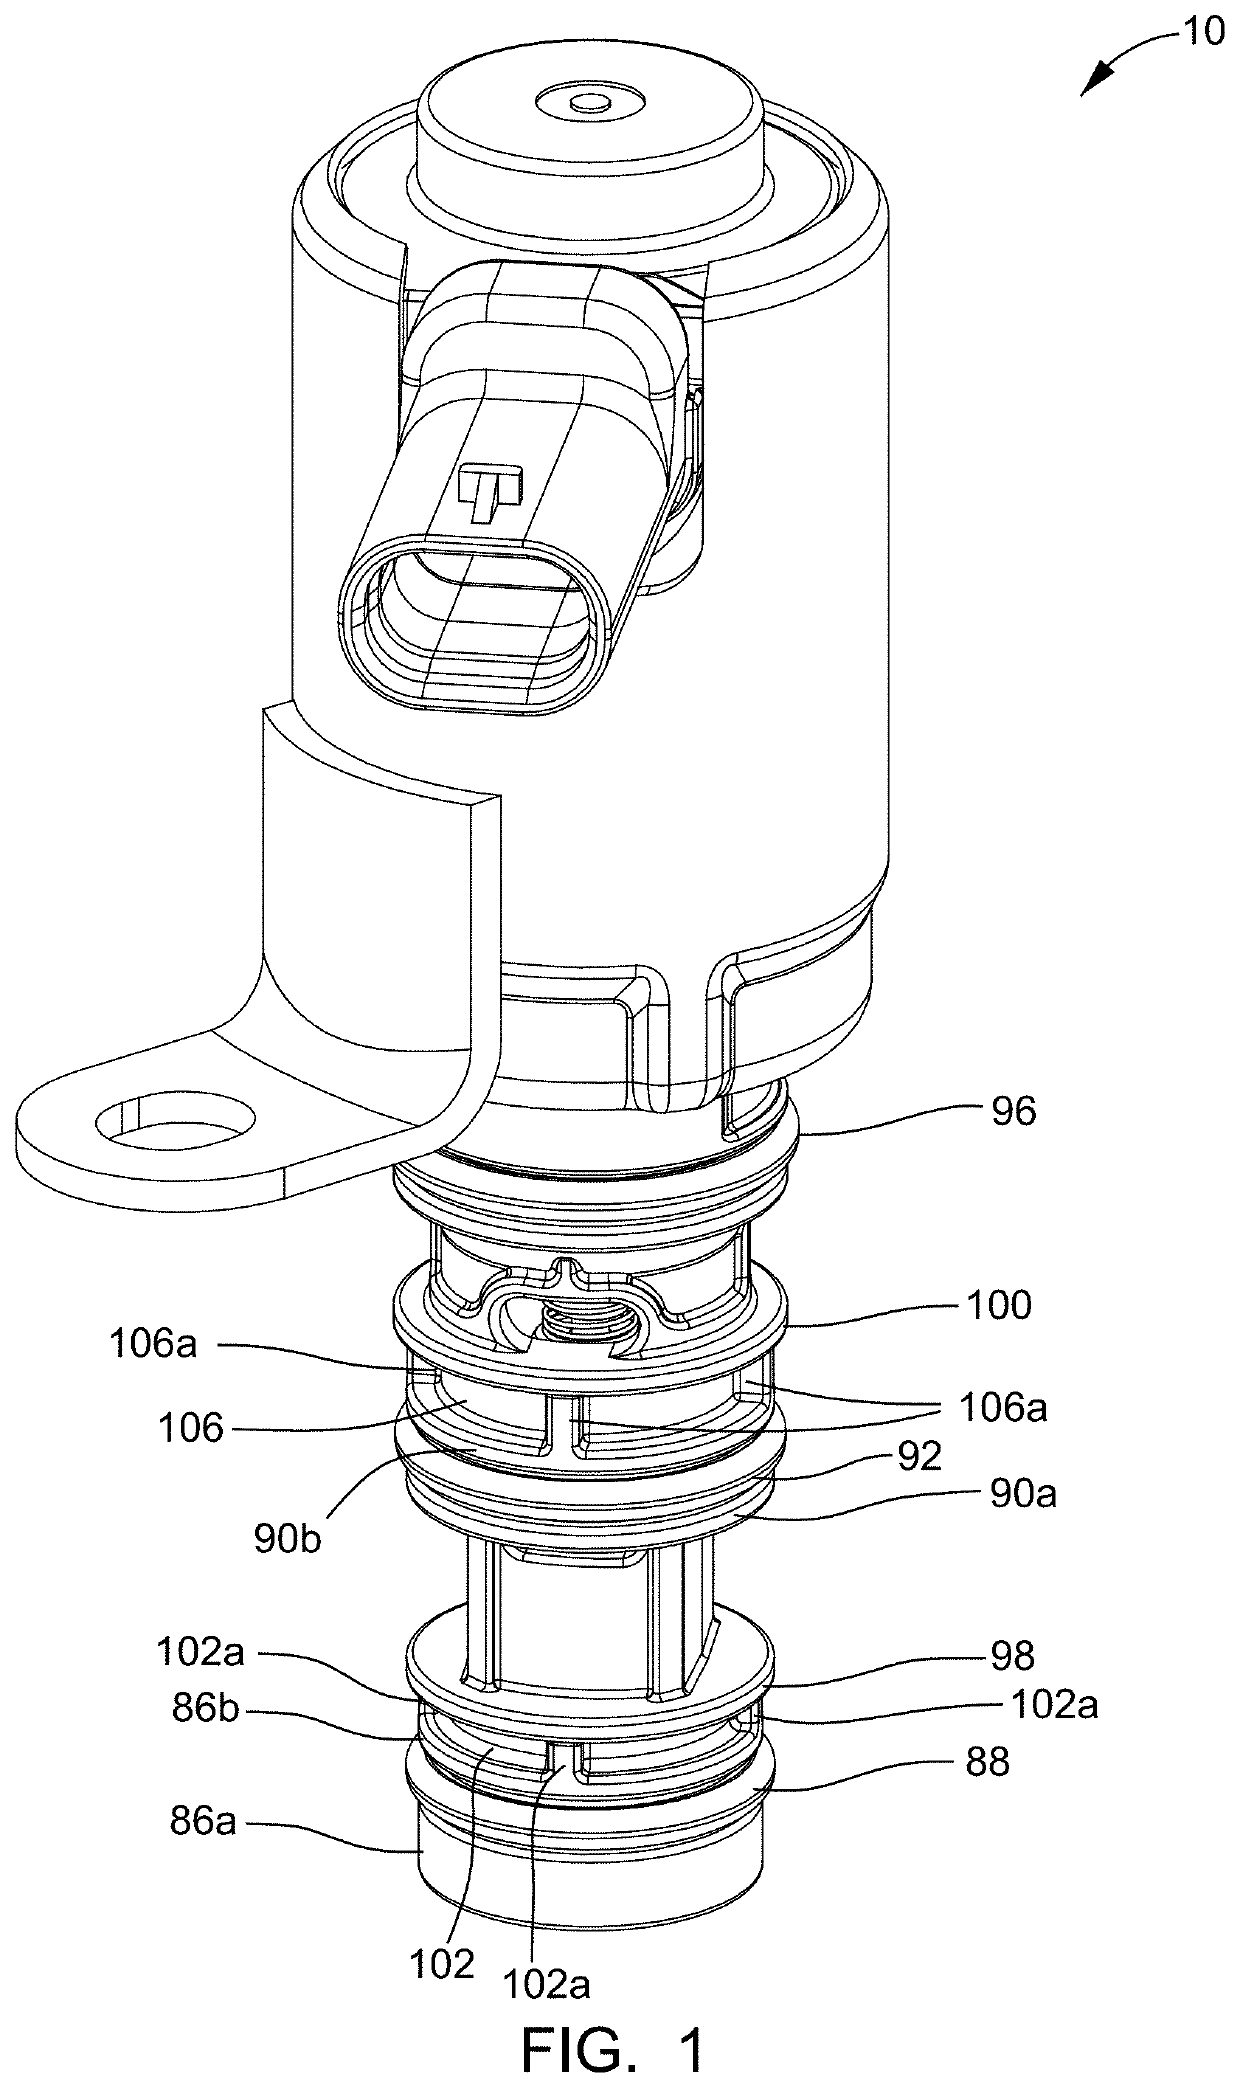 Valve assembly with Anti-tip features